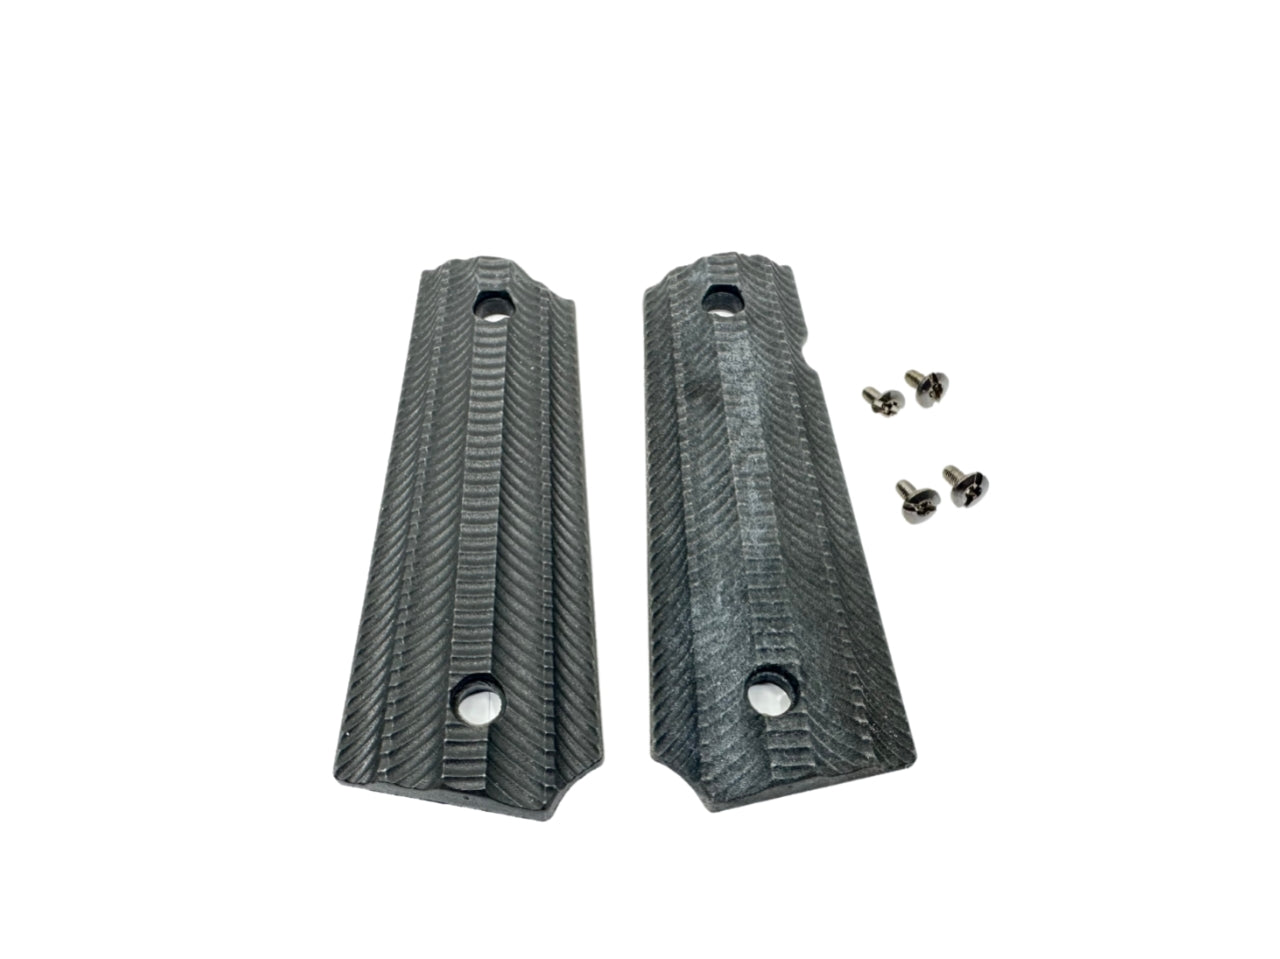 Ready Fighter Aliens Pistol GripS for Marui M1911 Series with One Set of Slex Screws